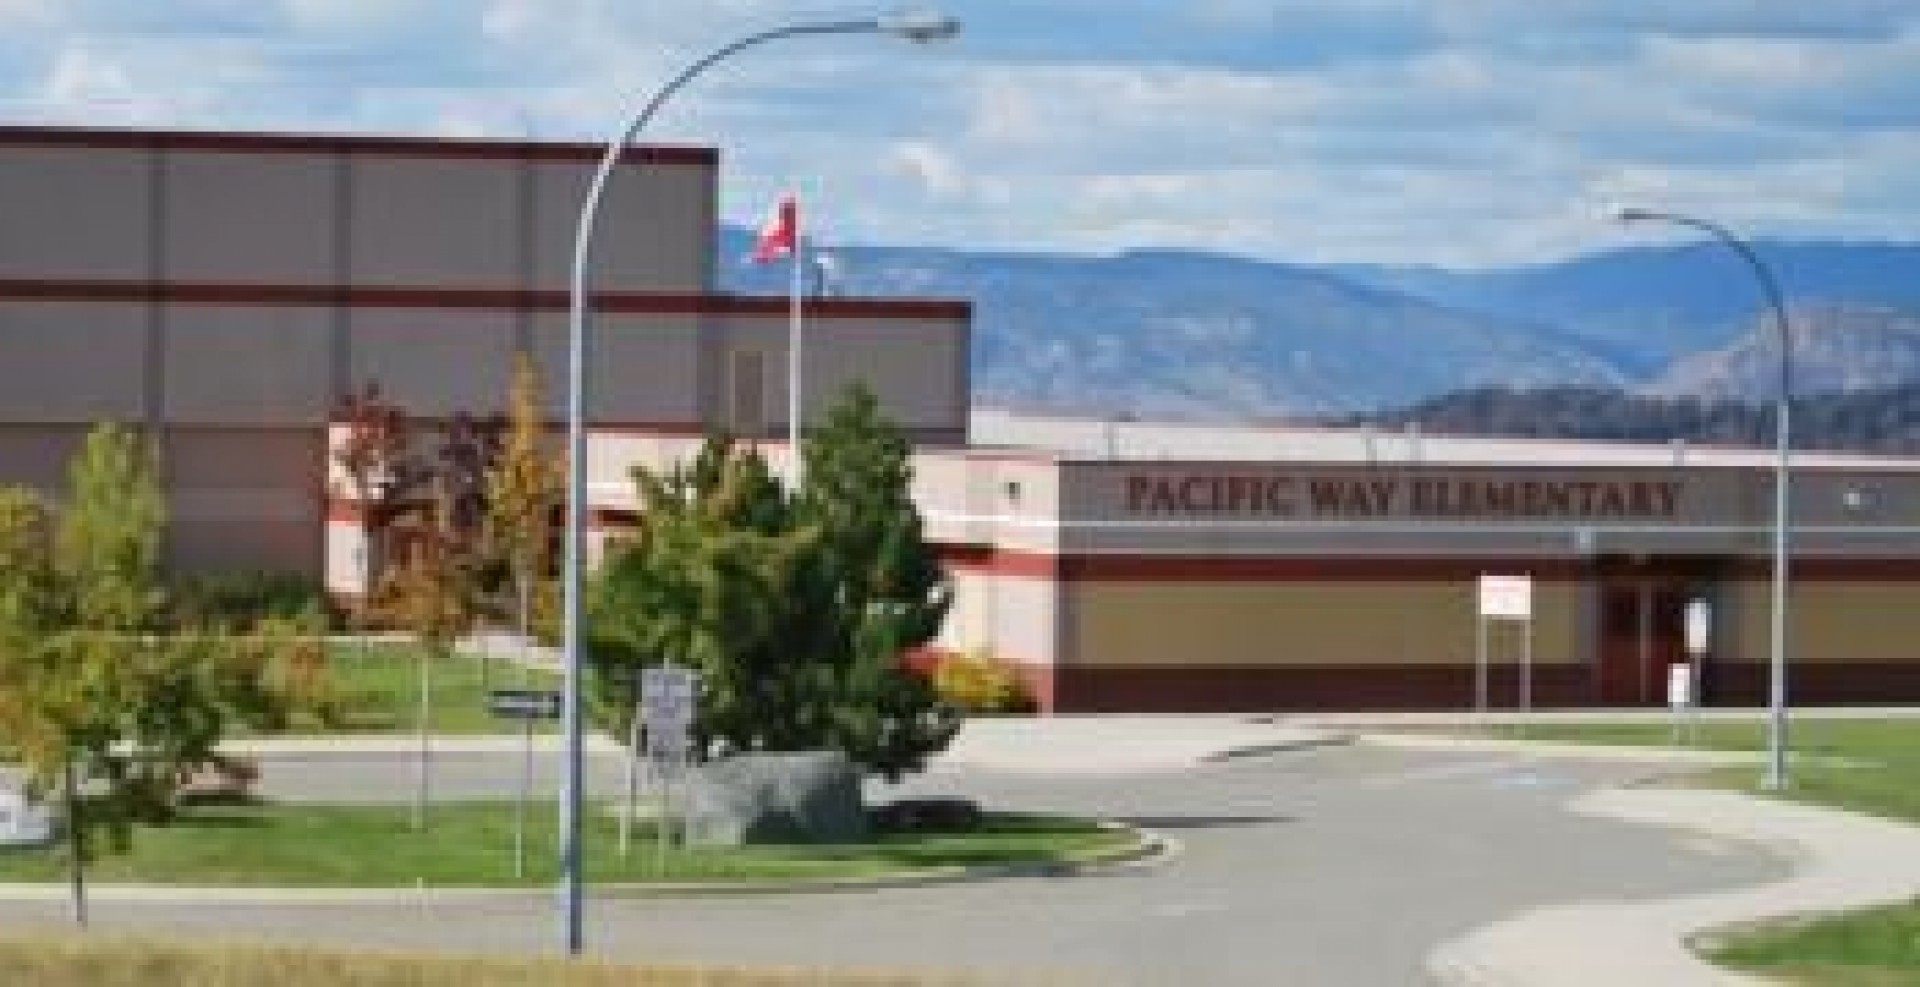 Pacific Way Elementary